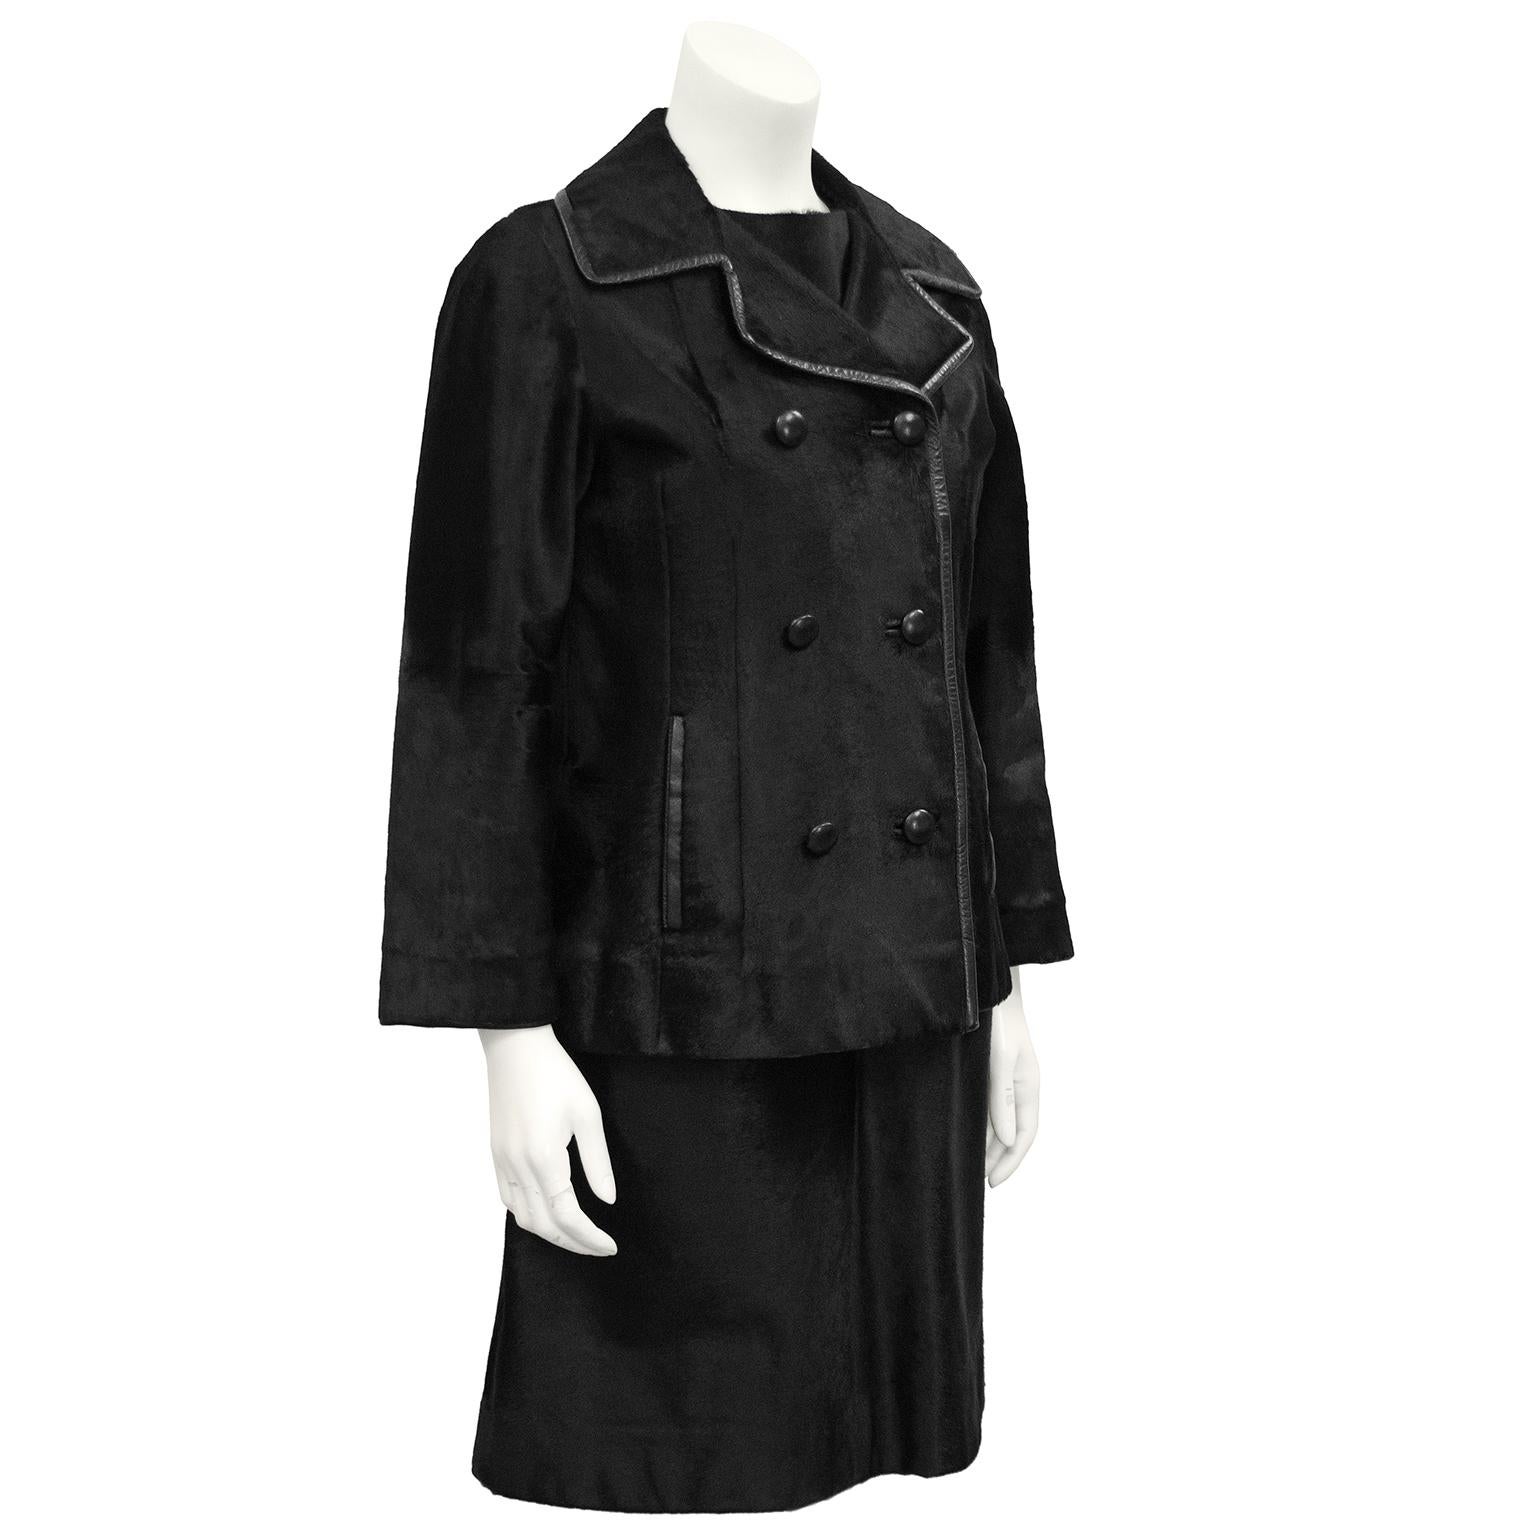 1960's Teal Traina Black Pony Hair Dress and Jacket Set In Excellent Condition For Sale In Toronto, Ontario